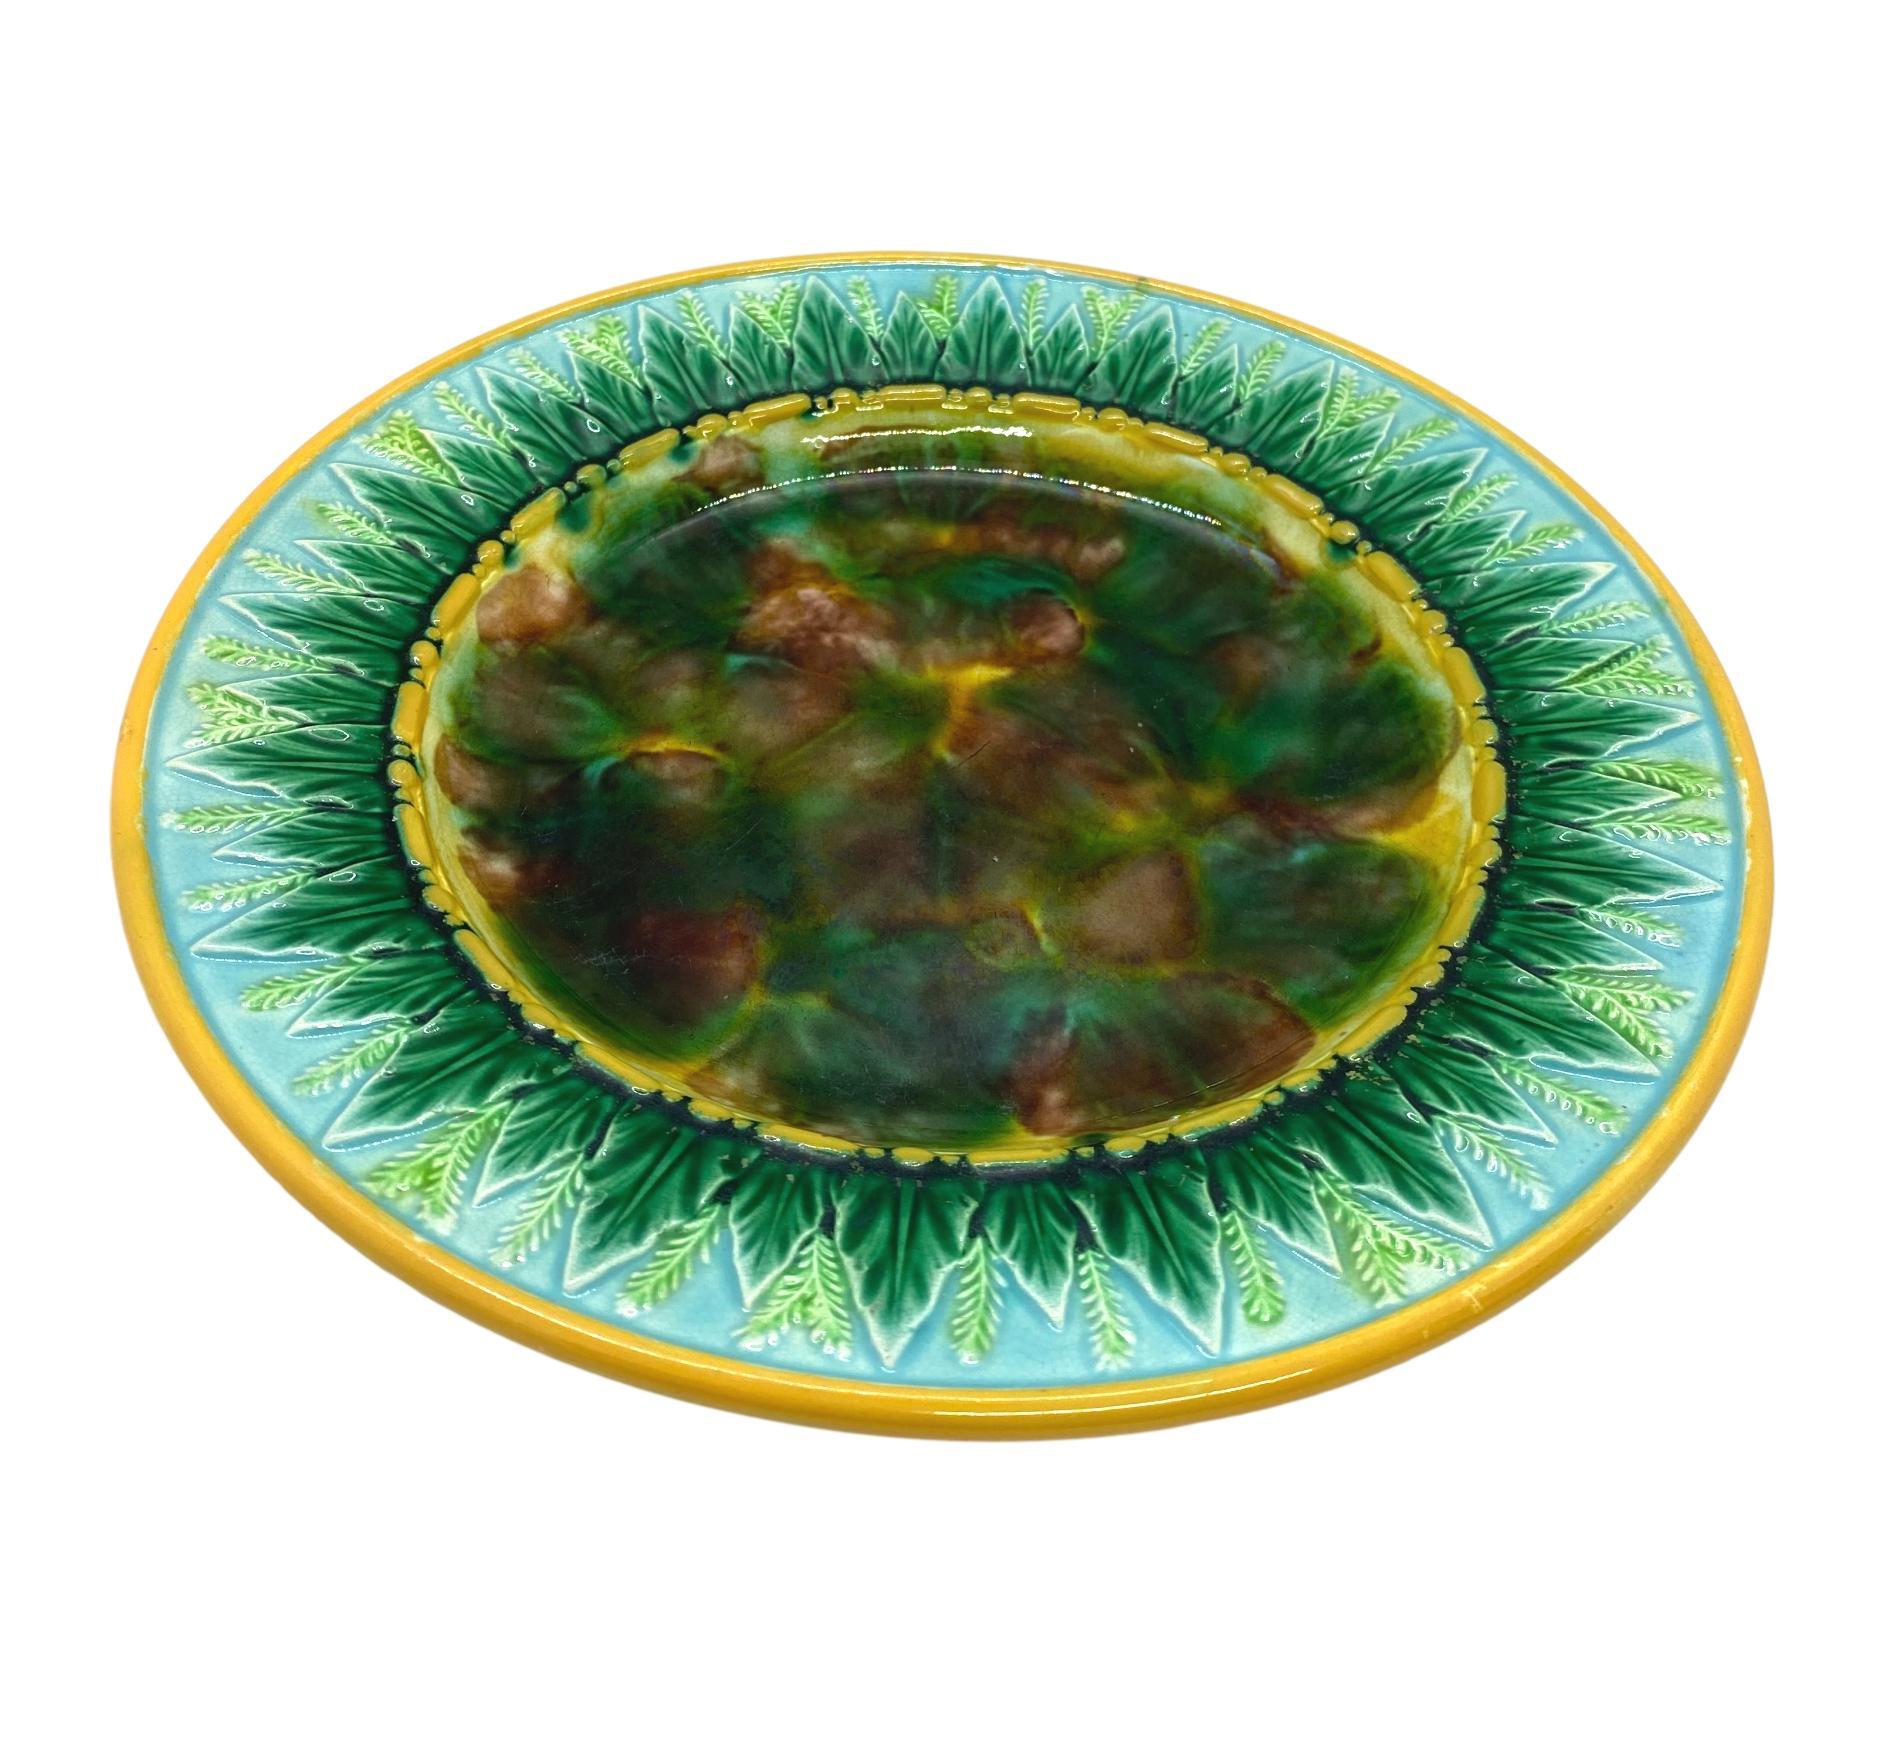 George Jones Majolica 9-in plate with mottled center, green wheat leaves and wheat stalks on turquoise, the inner and outer border glazed in yellow or ochre. The reverse with impressed 'GJ' monogram and painted pattern number '1808,' English, circa